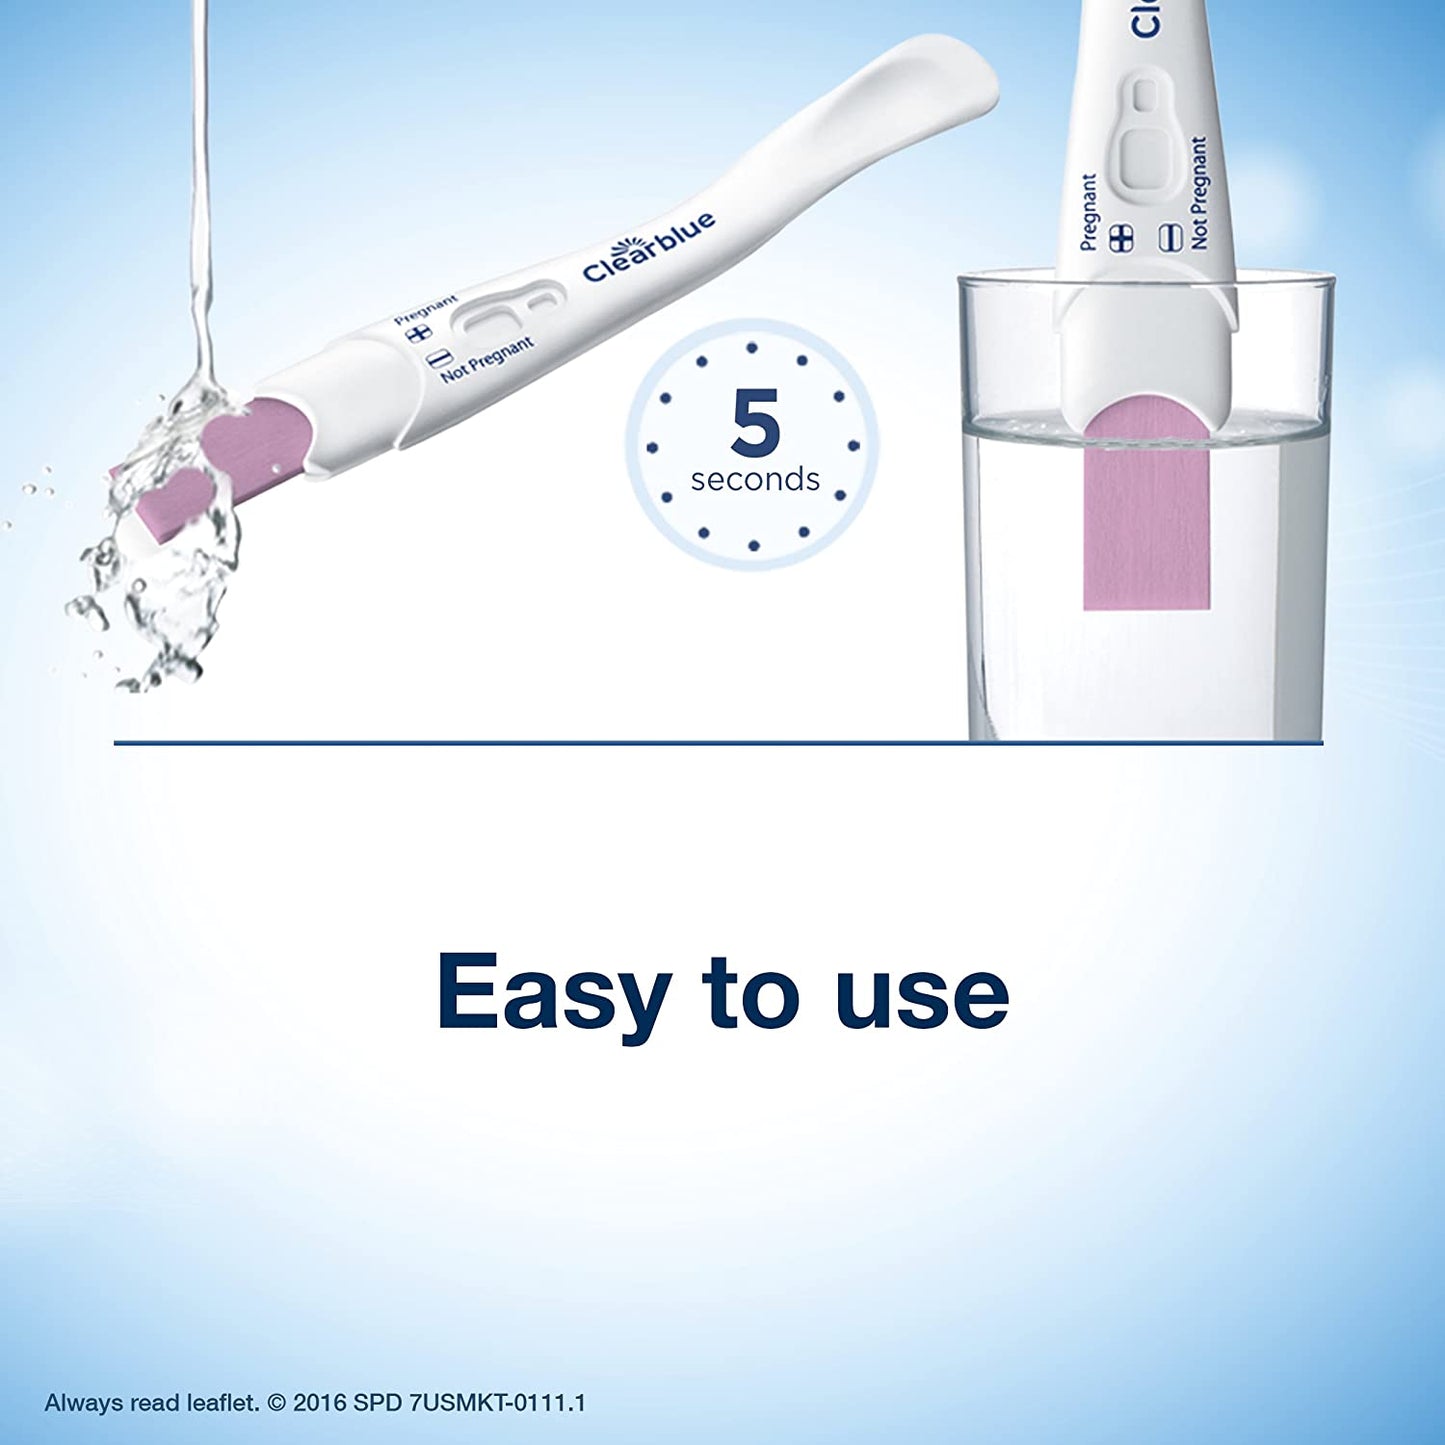 Clearblue Rapid Detection Pregnancy Test, 1 Count